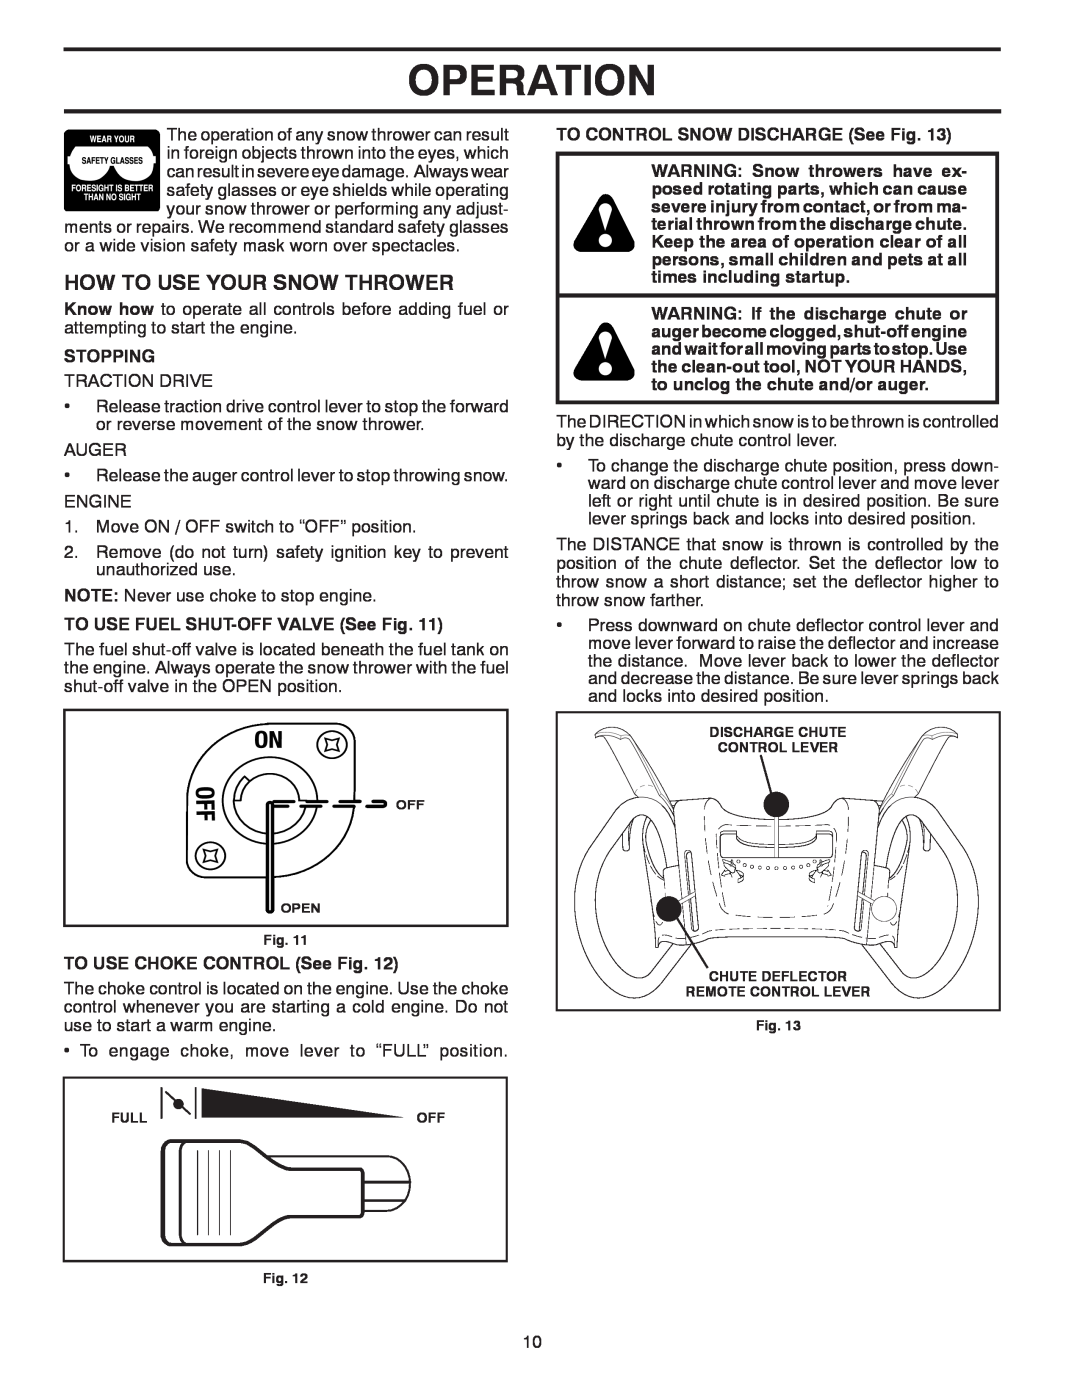 Poulan 437390, 96198003601 owner manual How To Use Your Snow Thrower, Operation, Stopping, TO USE FUEL SHUT-OFFVALVE See Fig 